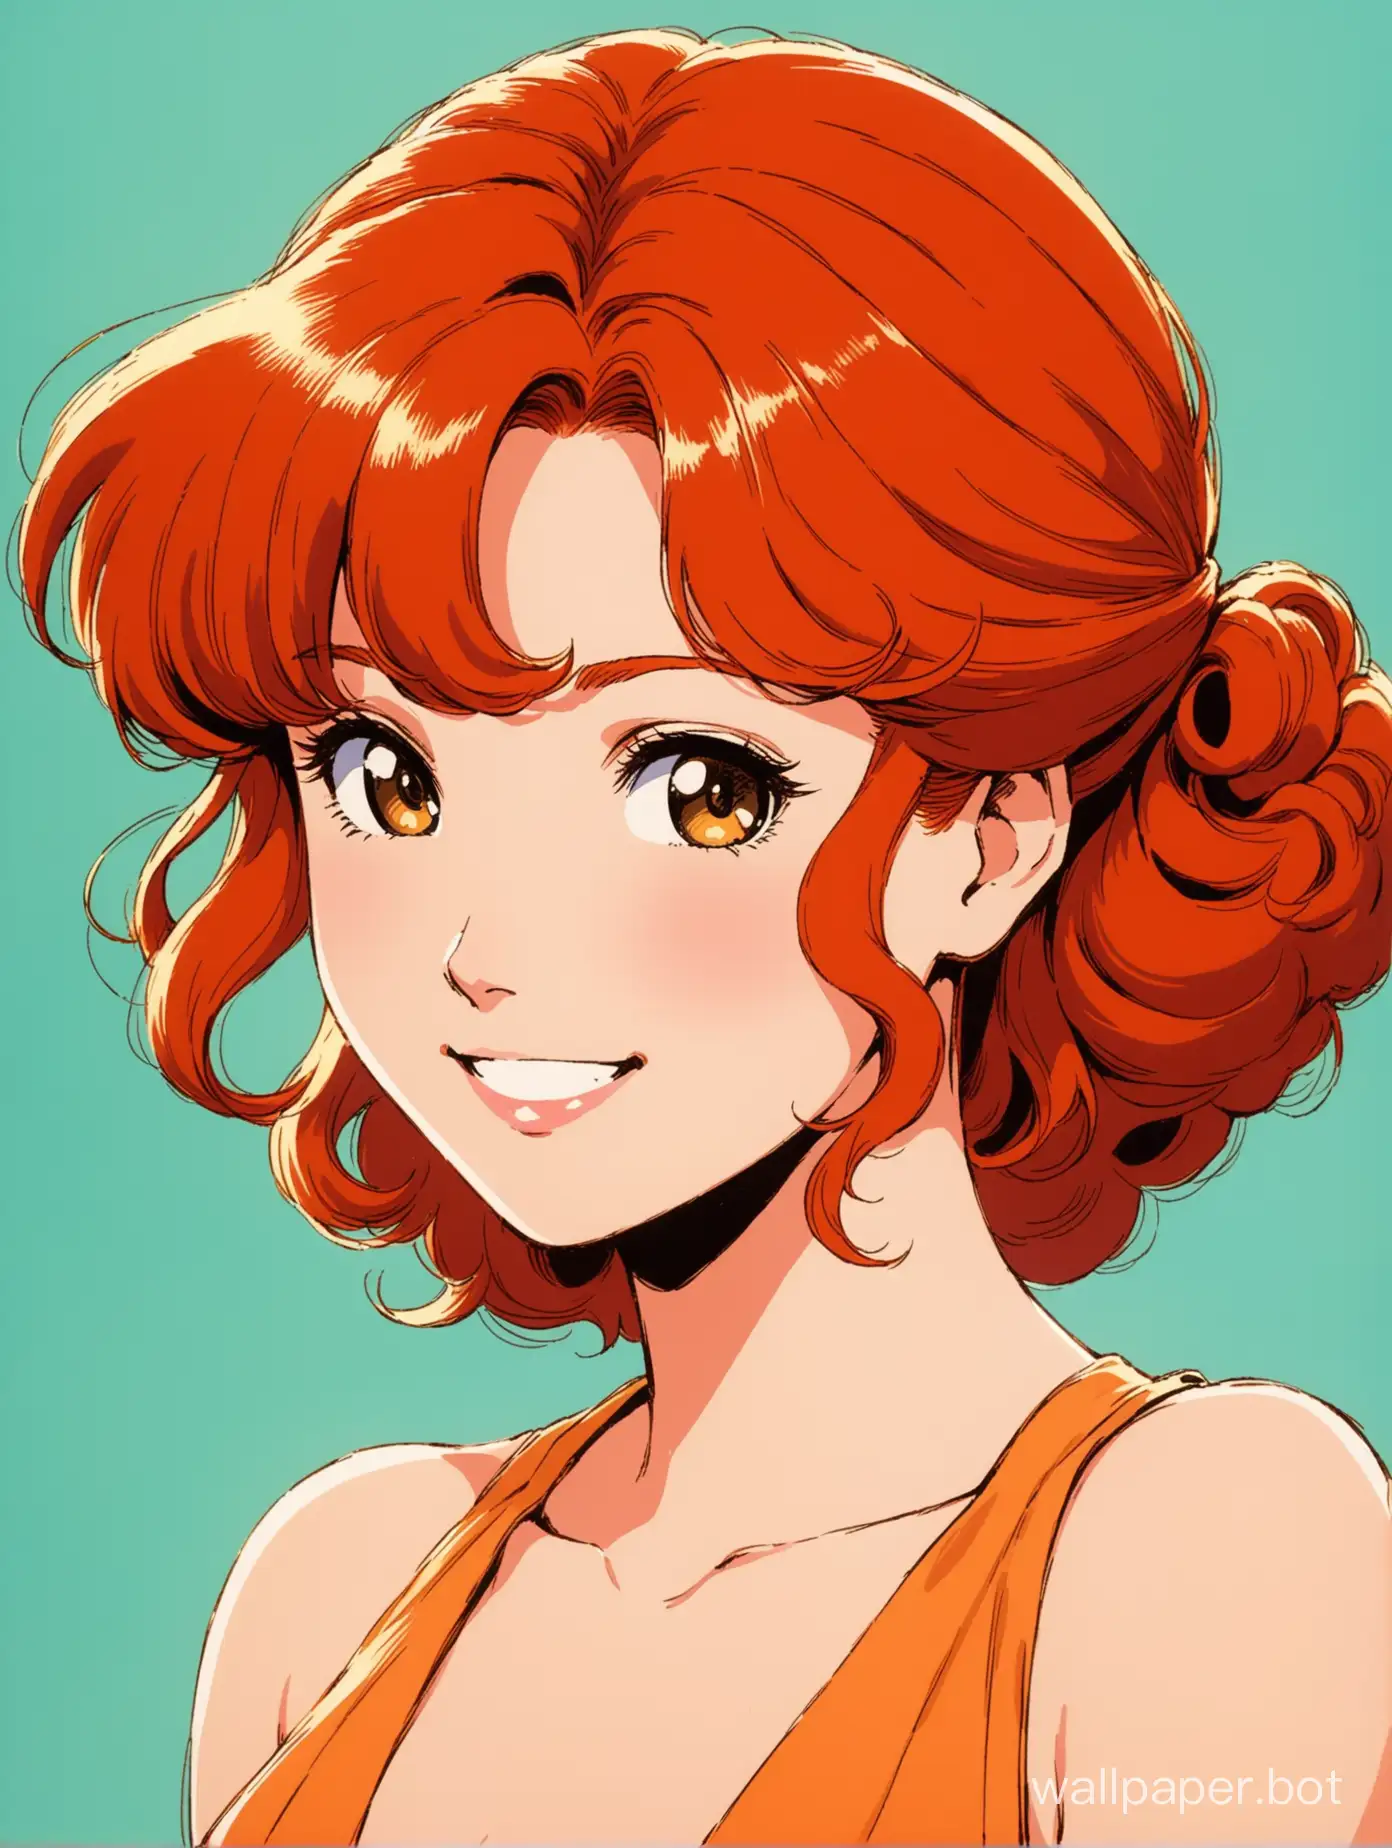 portrait of a beautiful young redhead woman, she has curly light red hair in a loose bun, she has a pleasant and pretty face, smiling slightly, plunging sleeveless dress, 1980s retro anime